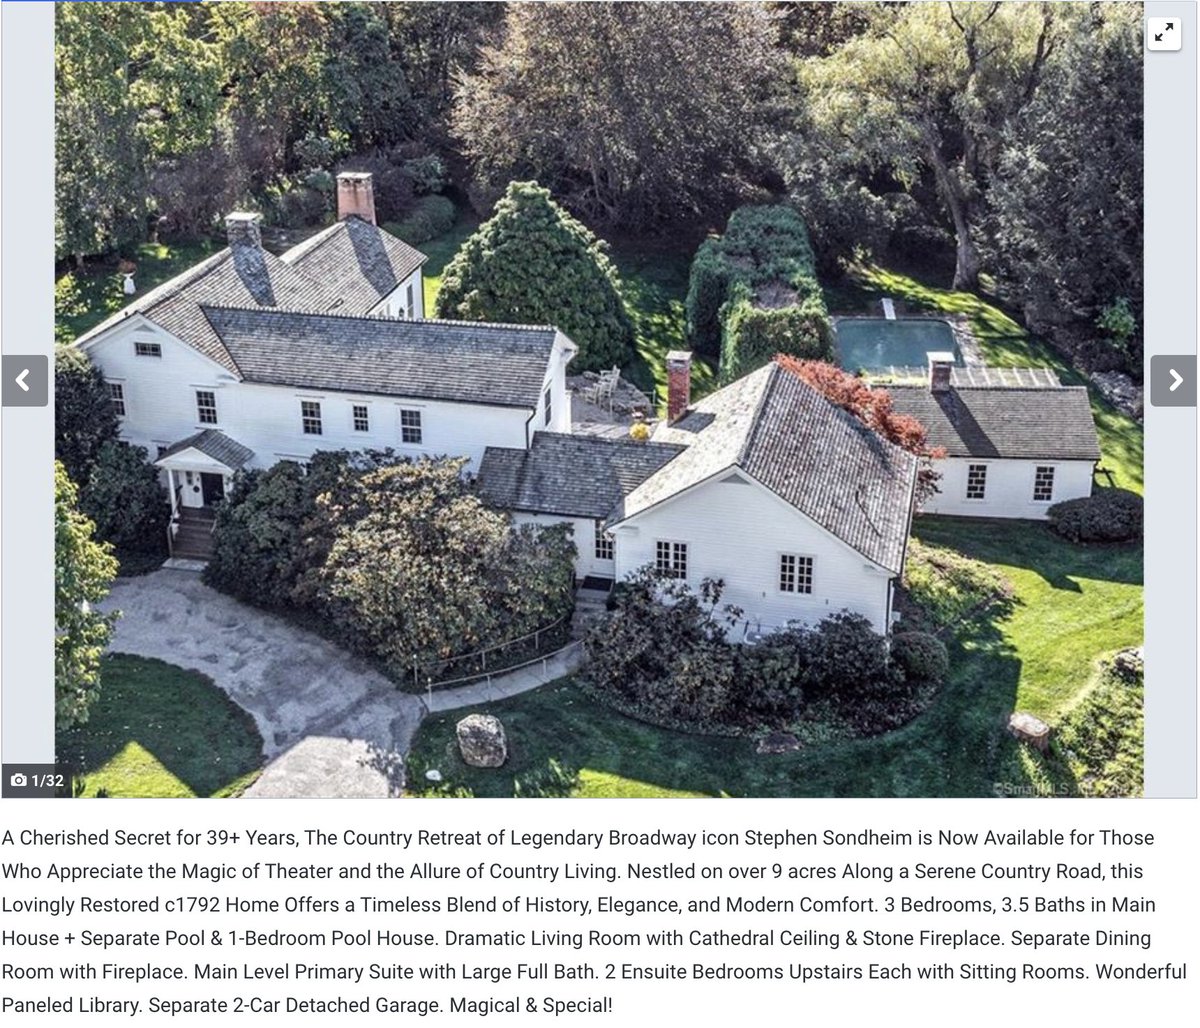 Stephen Sondheim's Connecticut home just went on the market. (Sunday in the Park with George Monkey and Mrs. Lovett’s menu not included) coldwellbankerhomes.com/ct/roxbury/add…